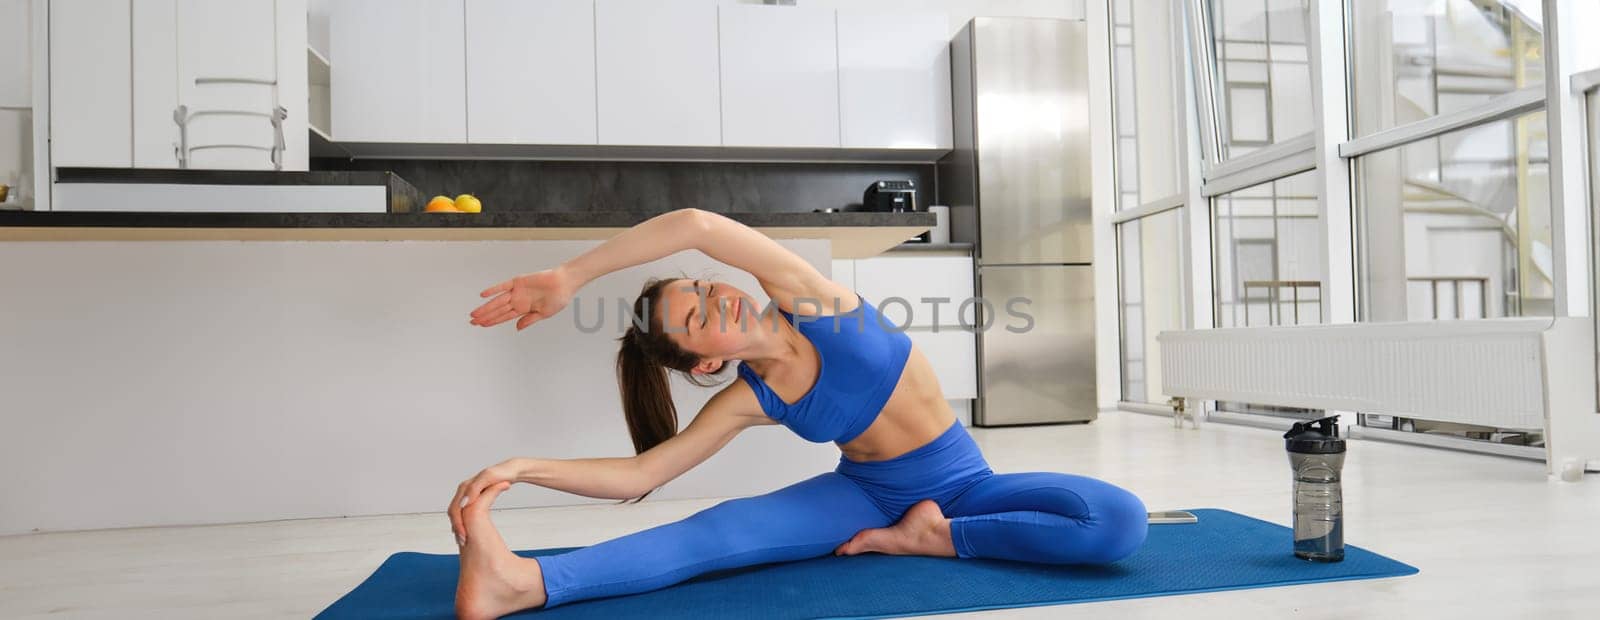 Portrait of beautiful young woman gymanst, stretching her body during workout at home, doing fitness exercises, stretching legs and arms, wearing blue sportsbra and leggings.